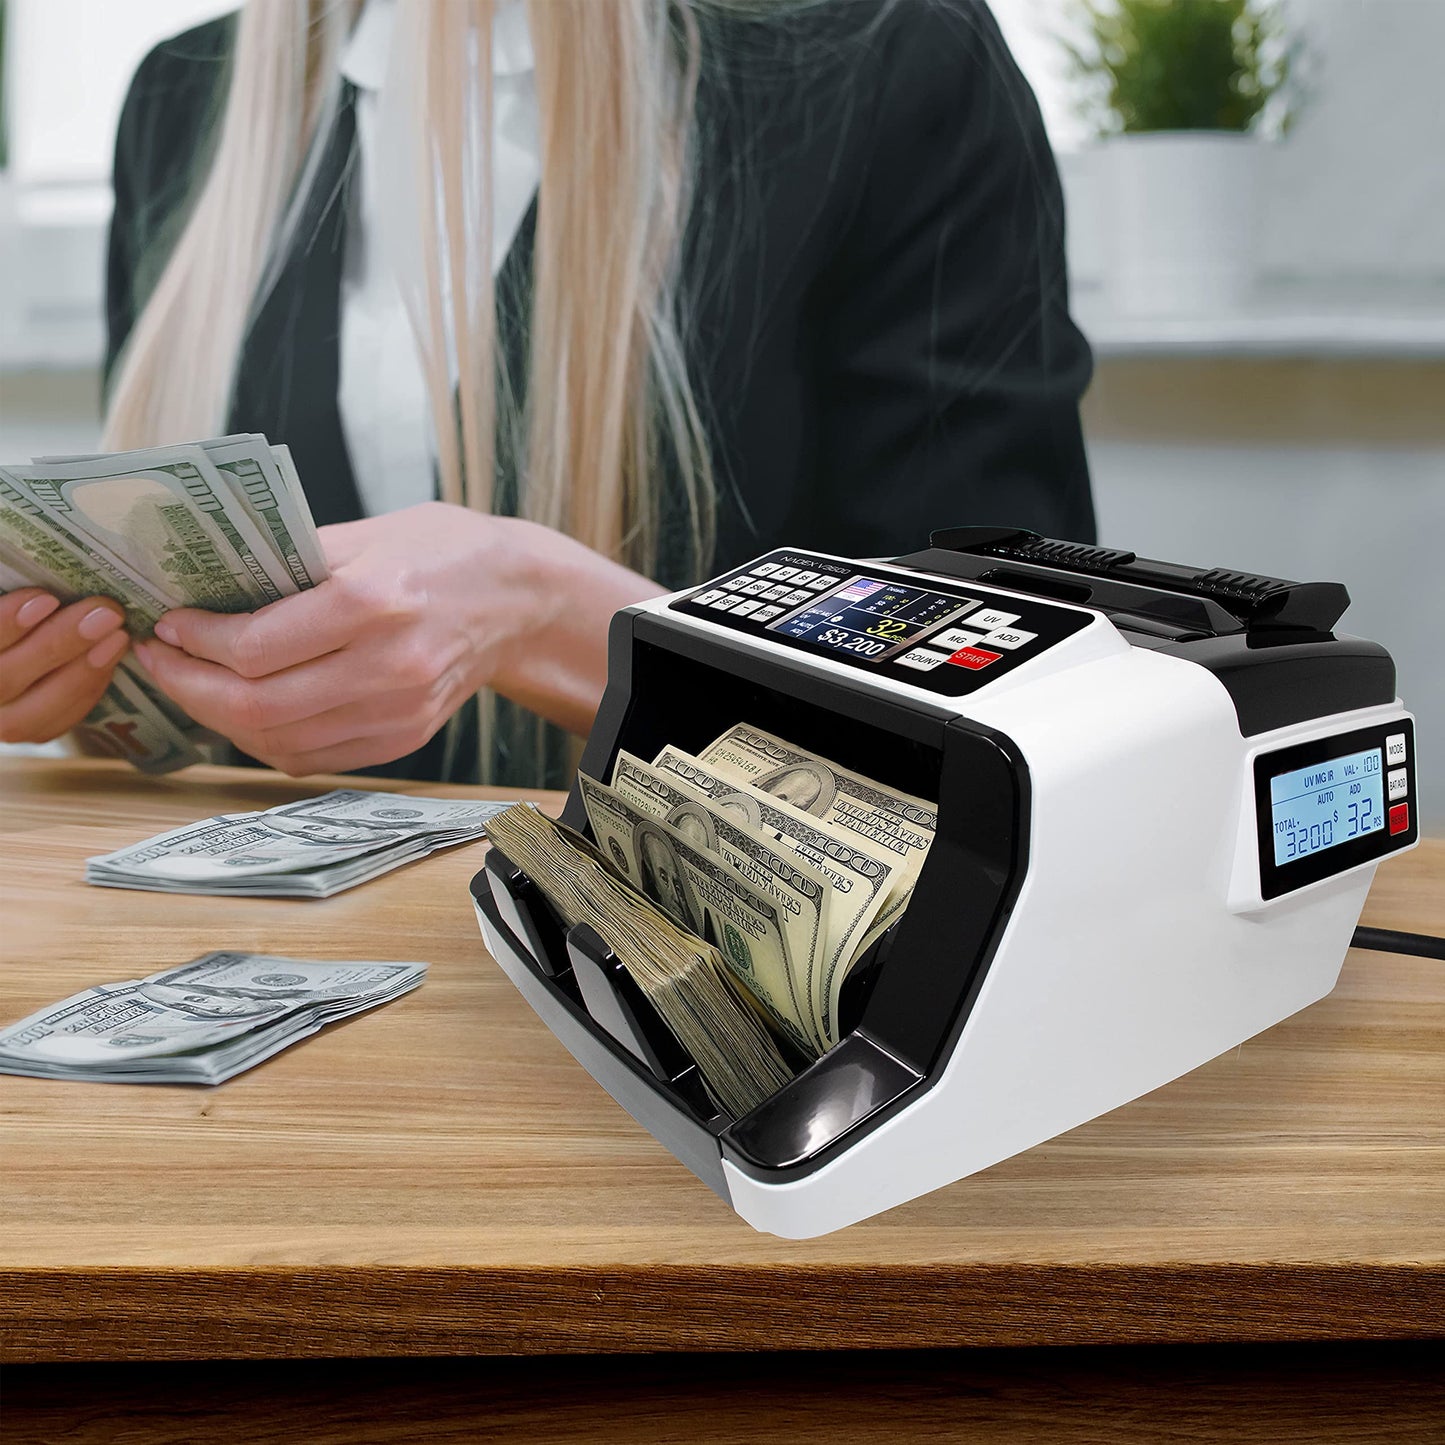 Nadex V3600 Value Display Money Counter and Counterfeit Detector, High Speed Bill Counter